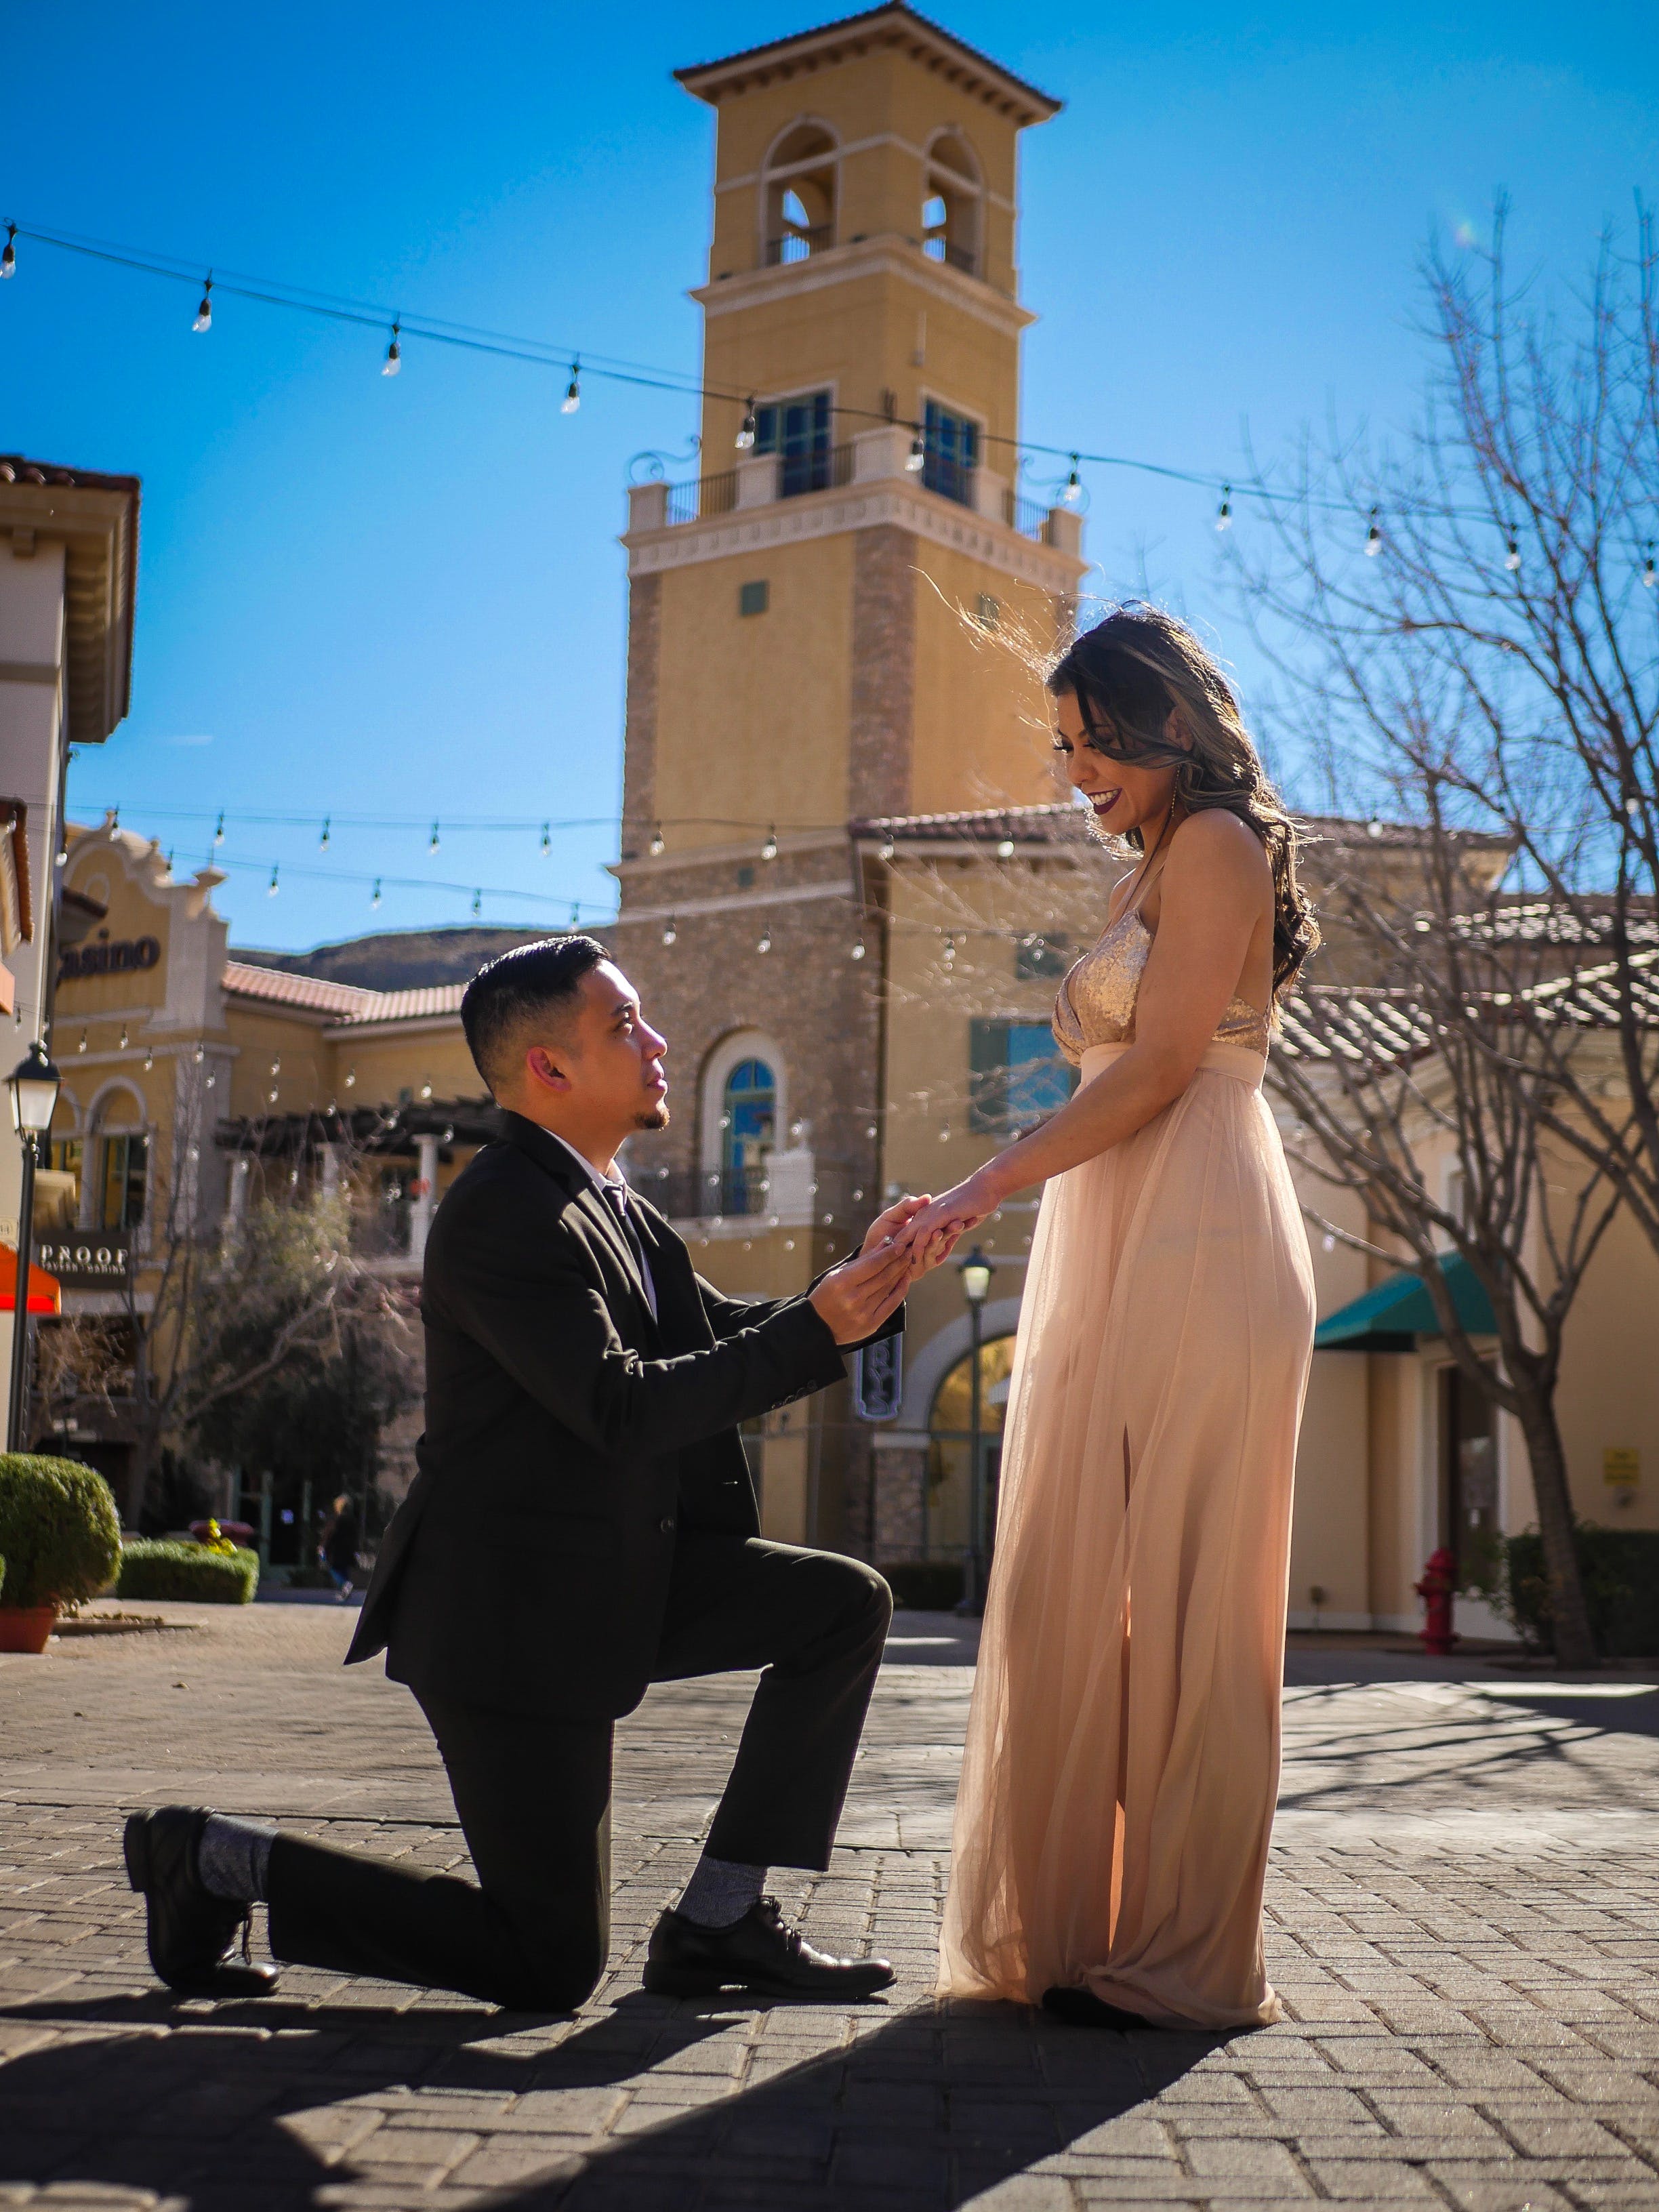 A man proposing to his girlfriend on bended knee | Source: Pexels